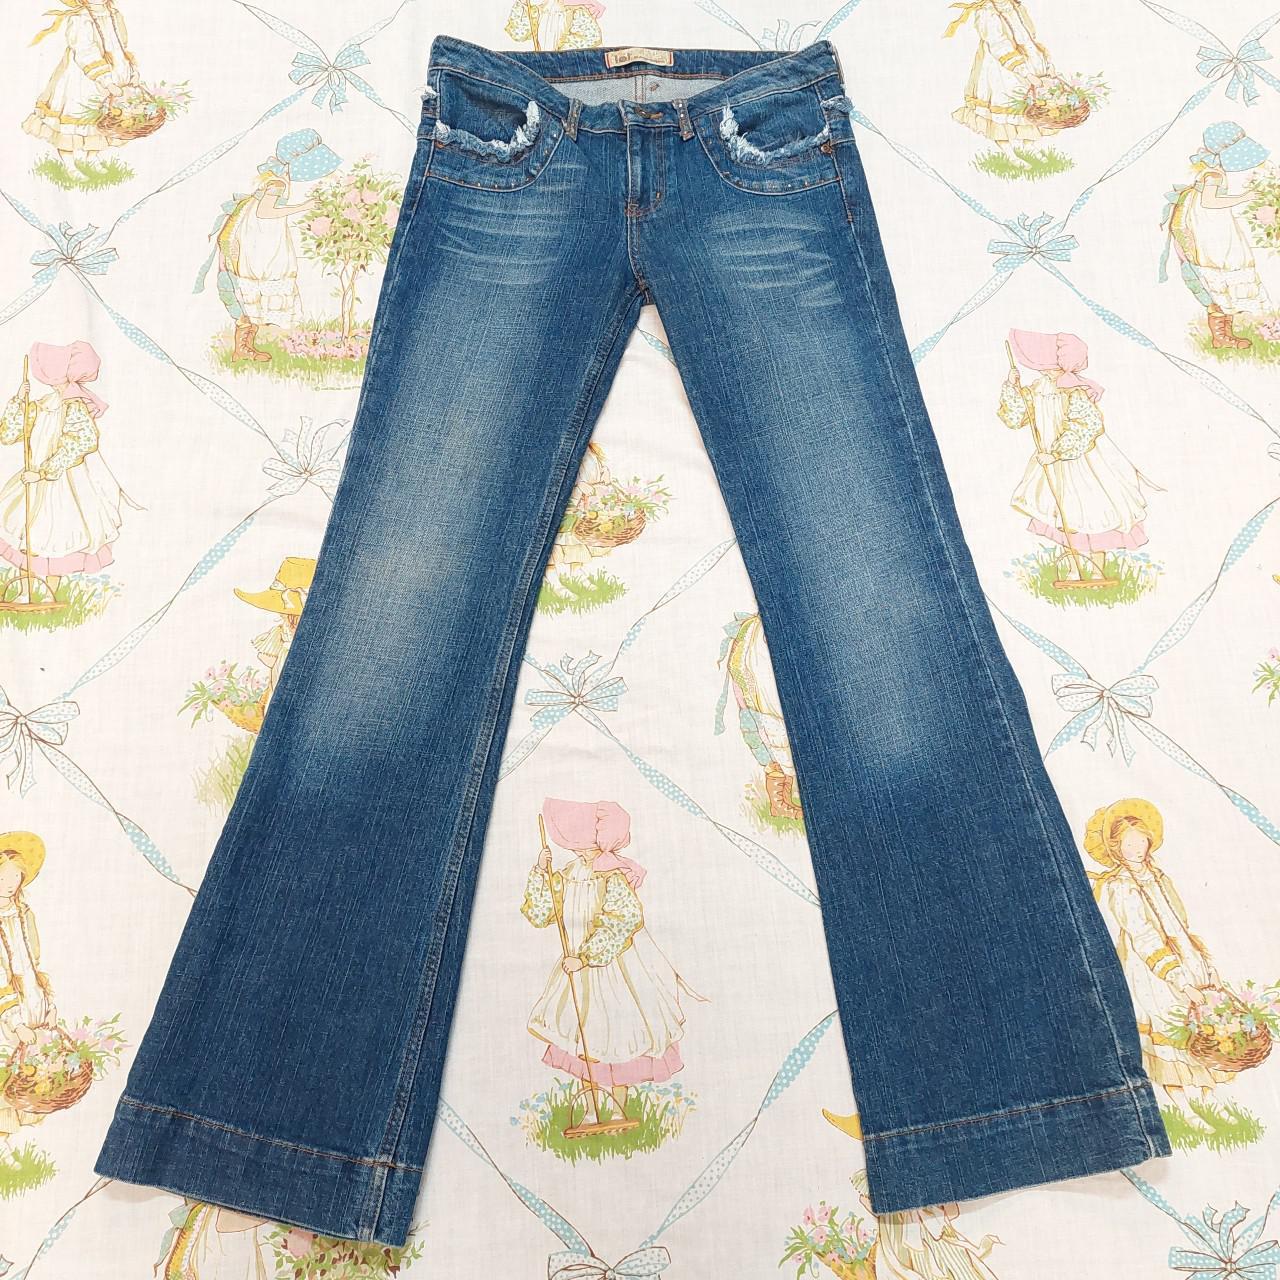 Product Image 1 - Y2k l.e.i. Jeans
Manufacturer distressing around